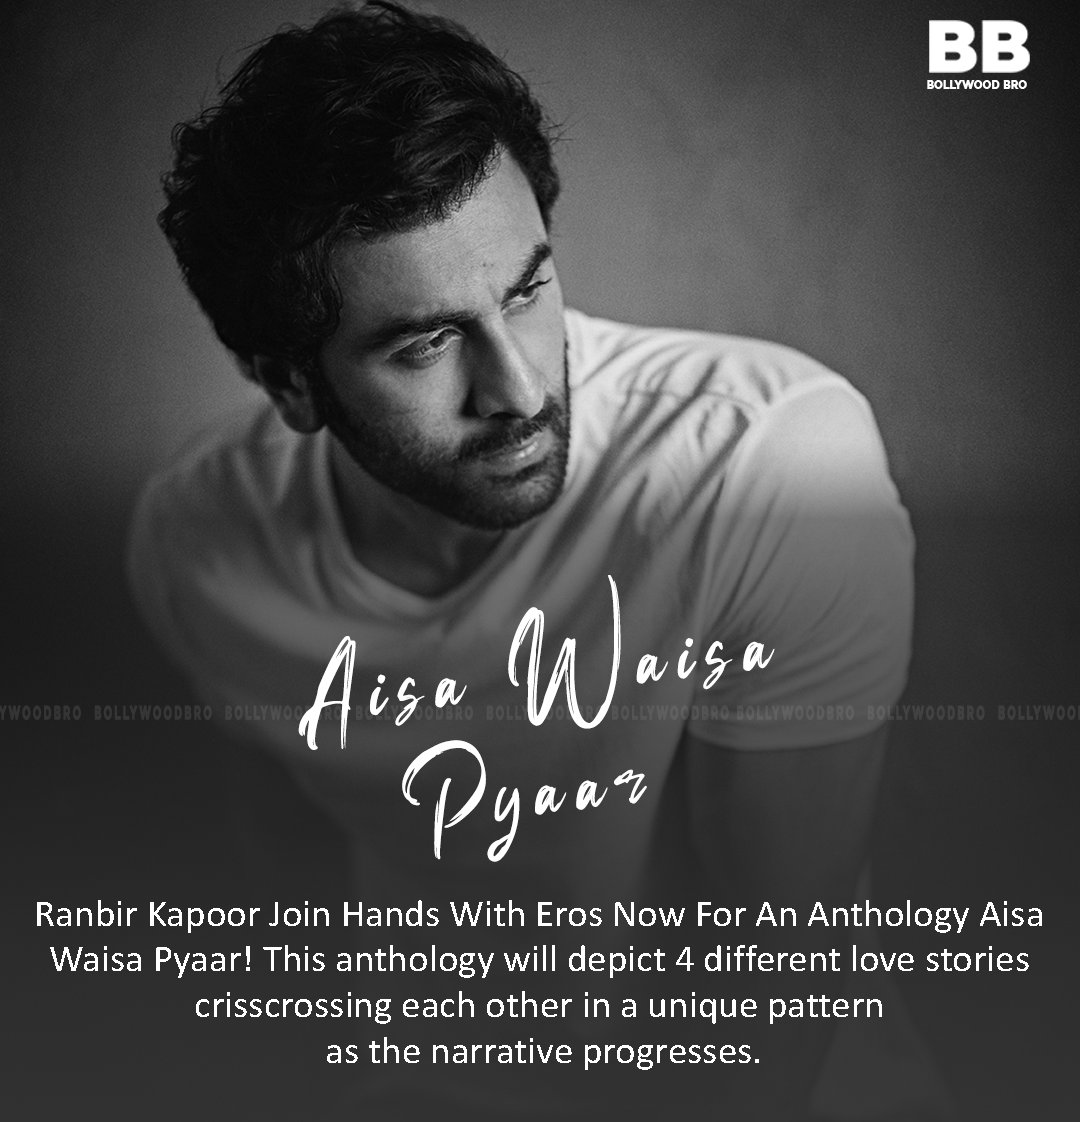 #RanbirKapoor Join Hands With #ErosNow For An Anthology #AisaWaisaPyaar! This anthology will depict 4 different love stories crisscrossing each other in a unique pattern as the narrative progresses.
Though things are yet to be finalized, industry rumors are general!